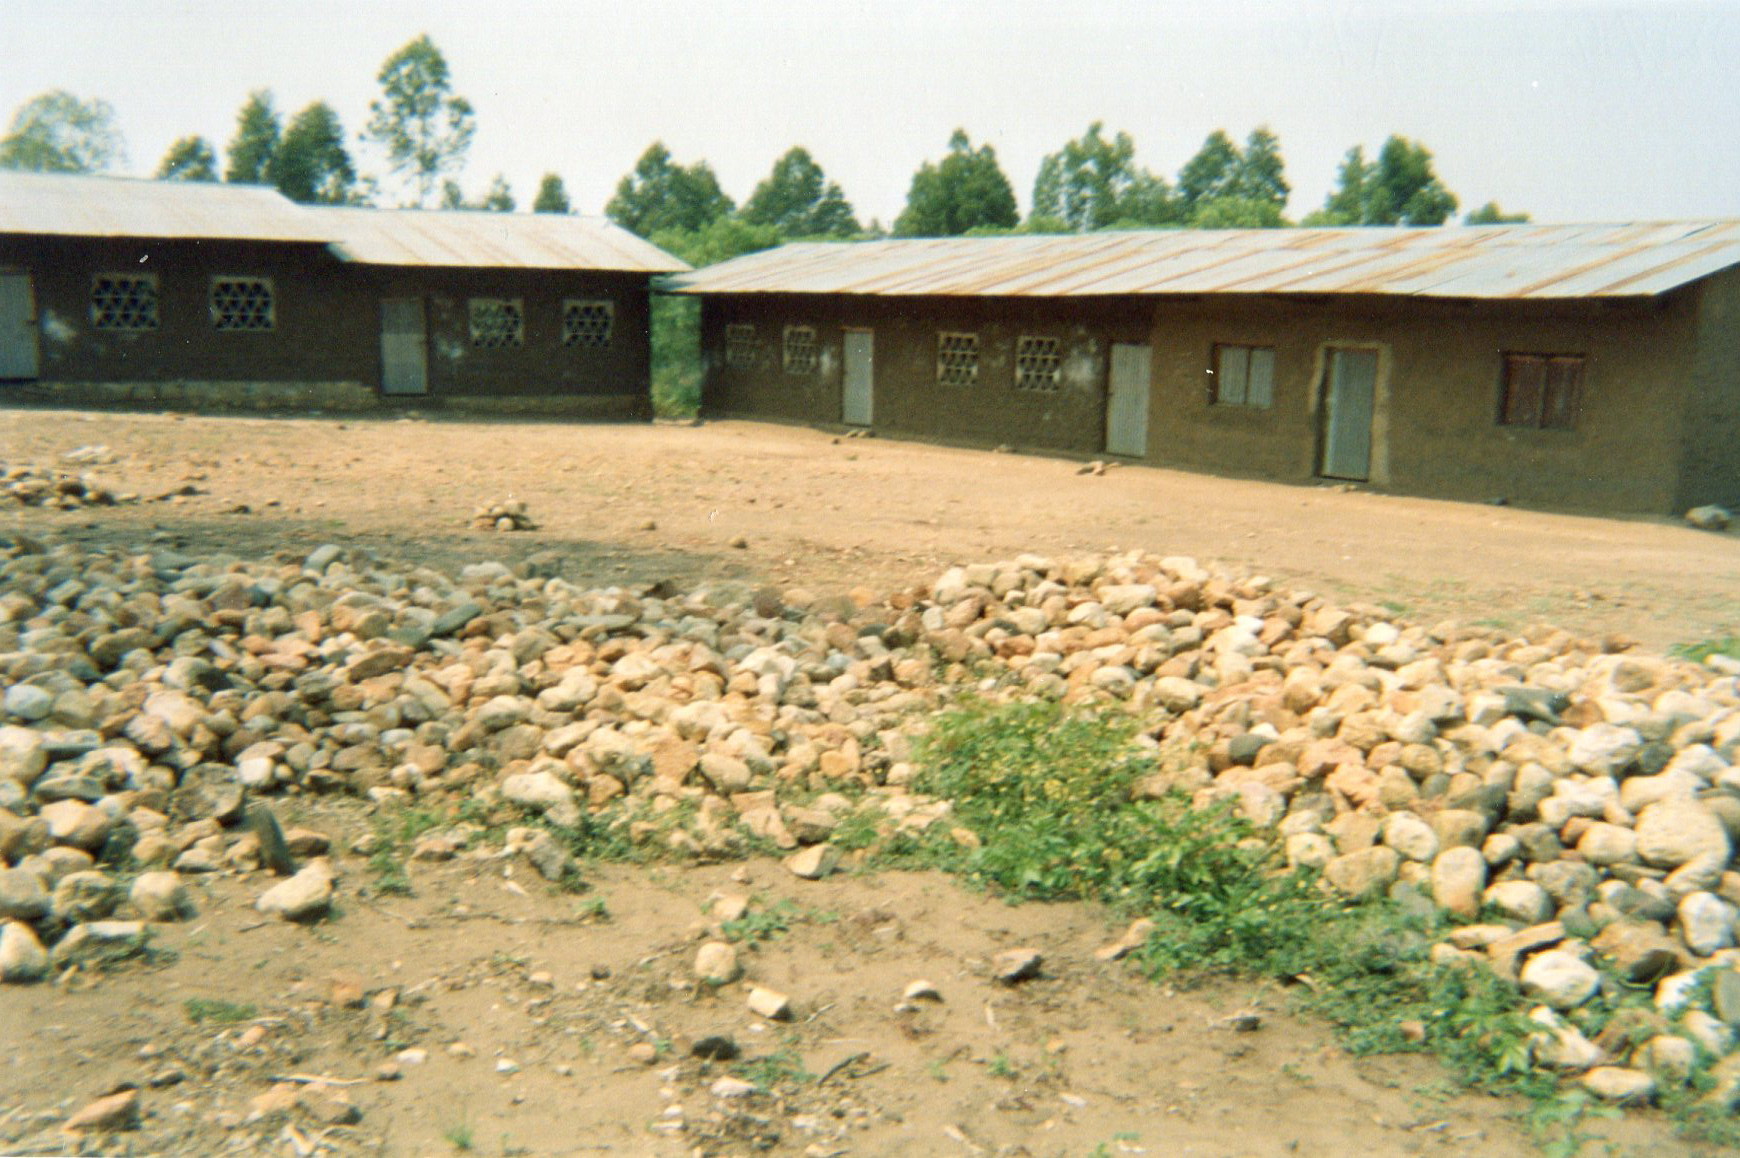  This photo shows the school which has played a big role in my educational reintegration.&nbsp; 